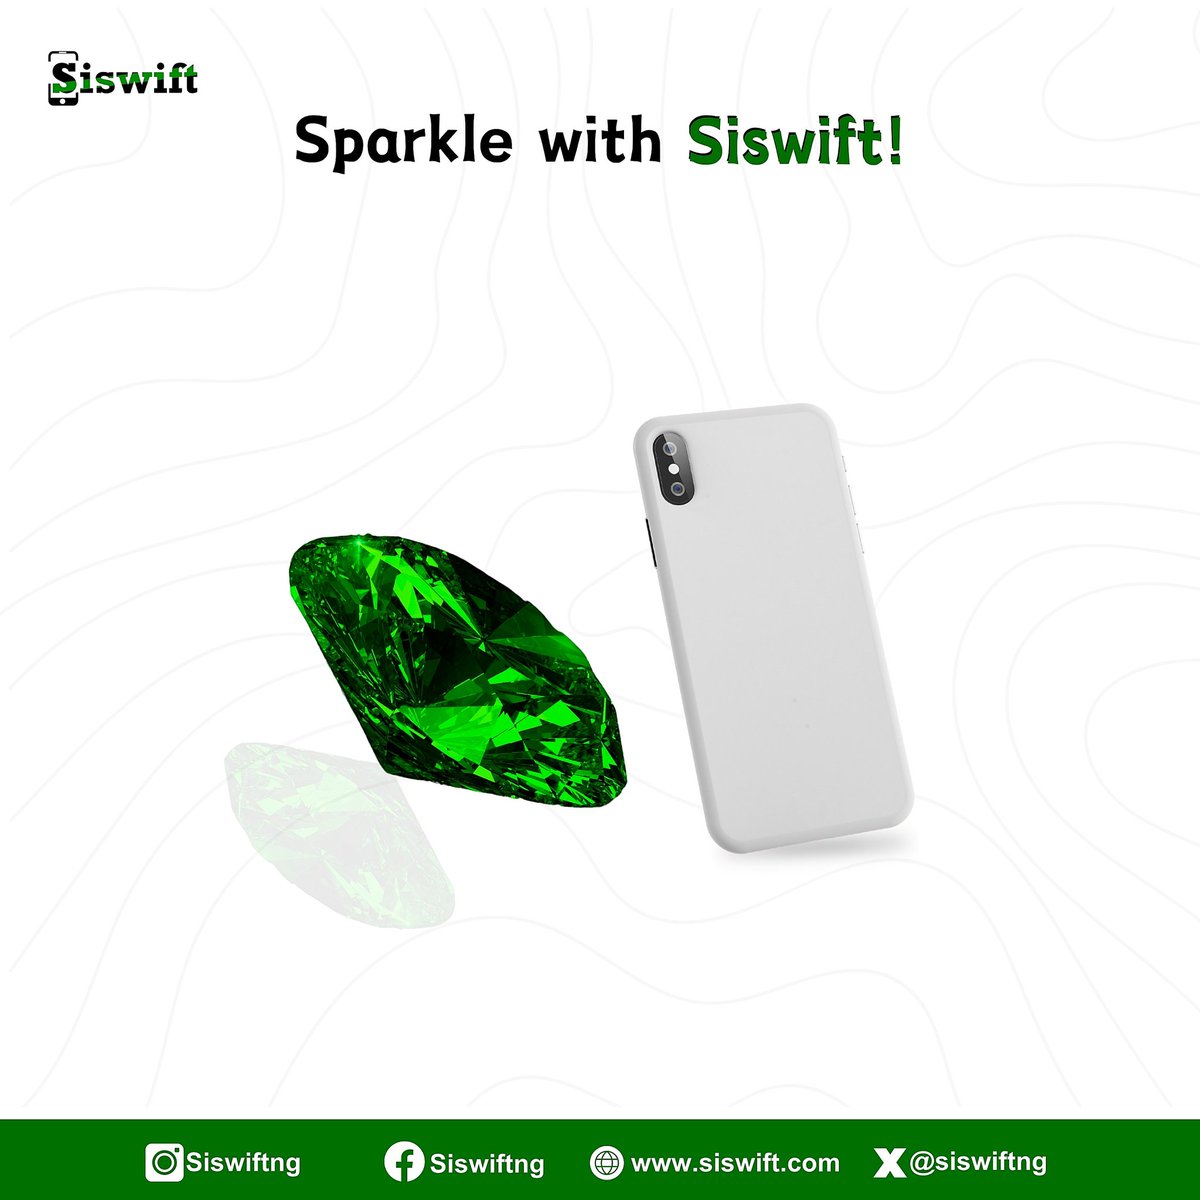 Shine bright with Siswift! 

Sparkle with the perfect phone and savings. 
.
.
.
#Siswift #ShineBright #transparenttransactions #negotiationpower #changingthegame #convenience #convenienceoverfixedprices #digitalmarketing #iphones #phones